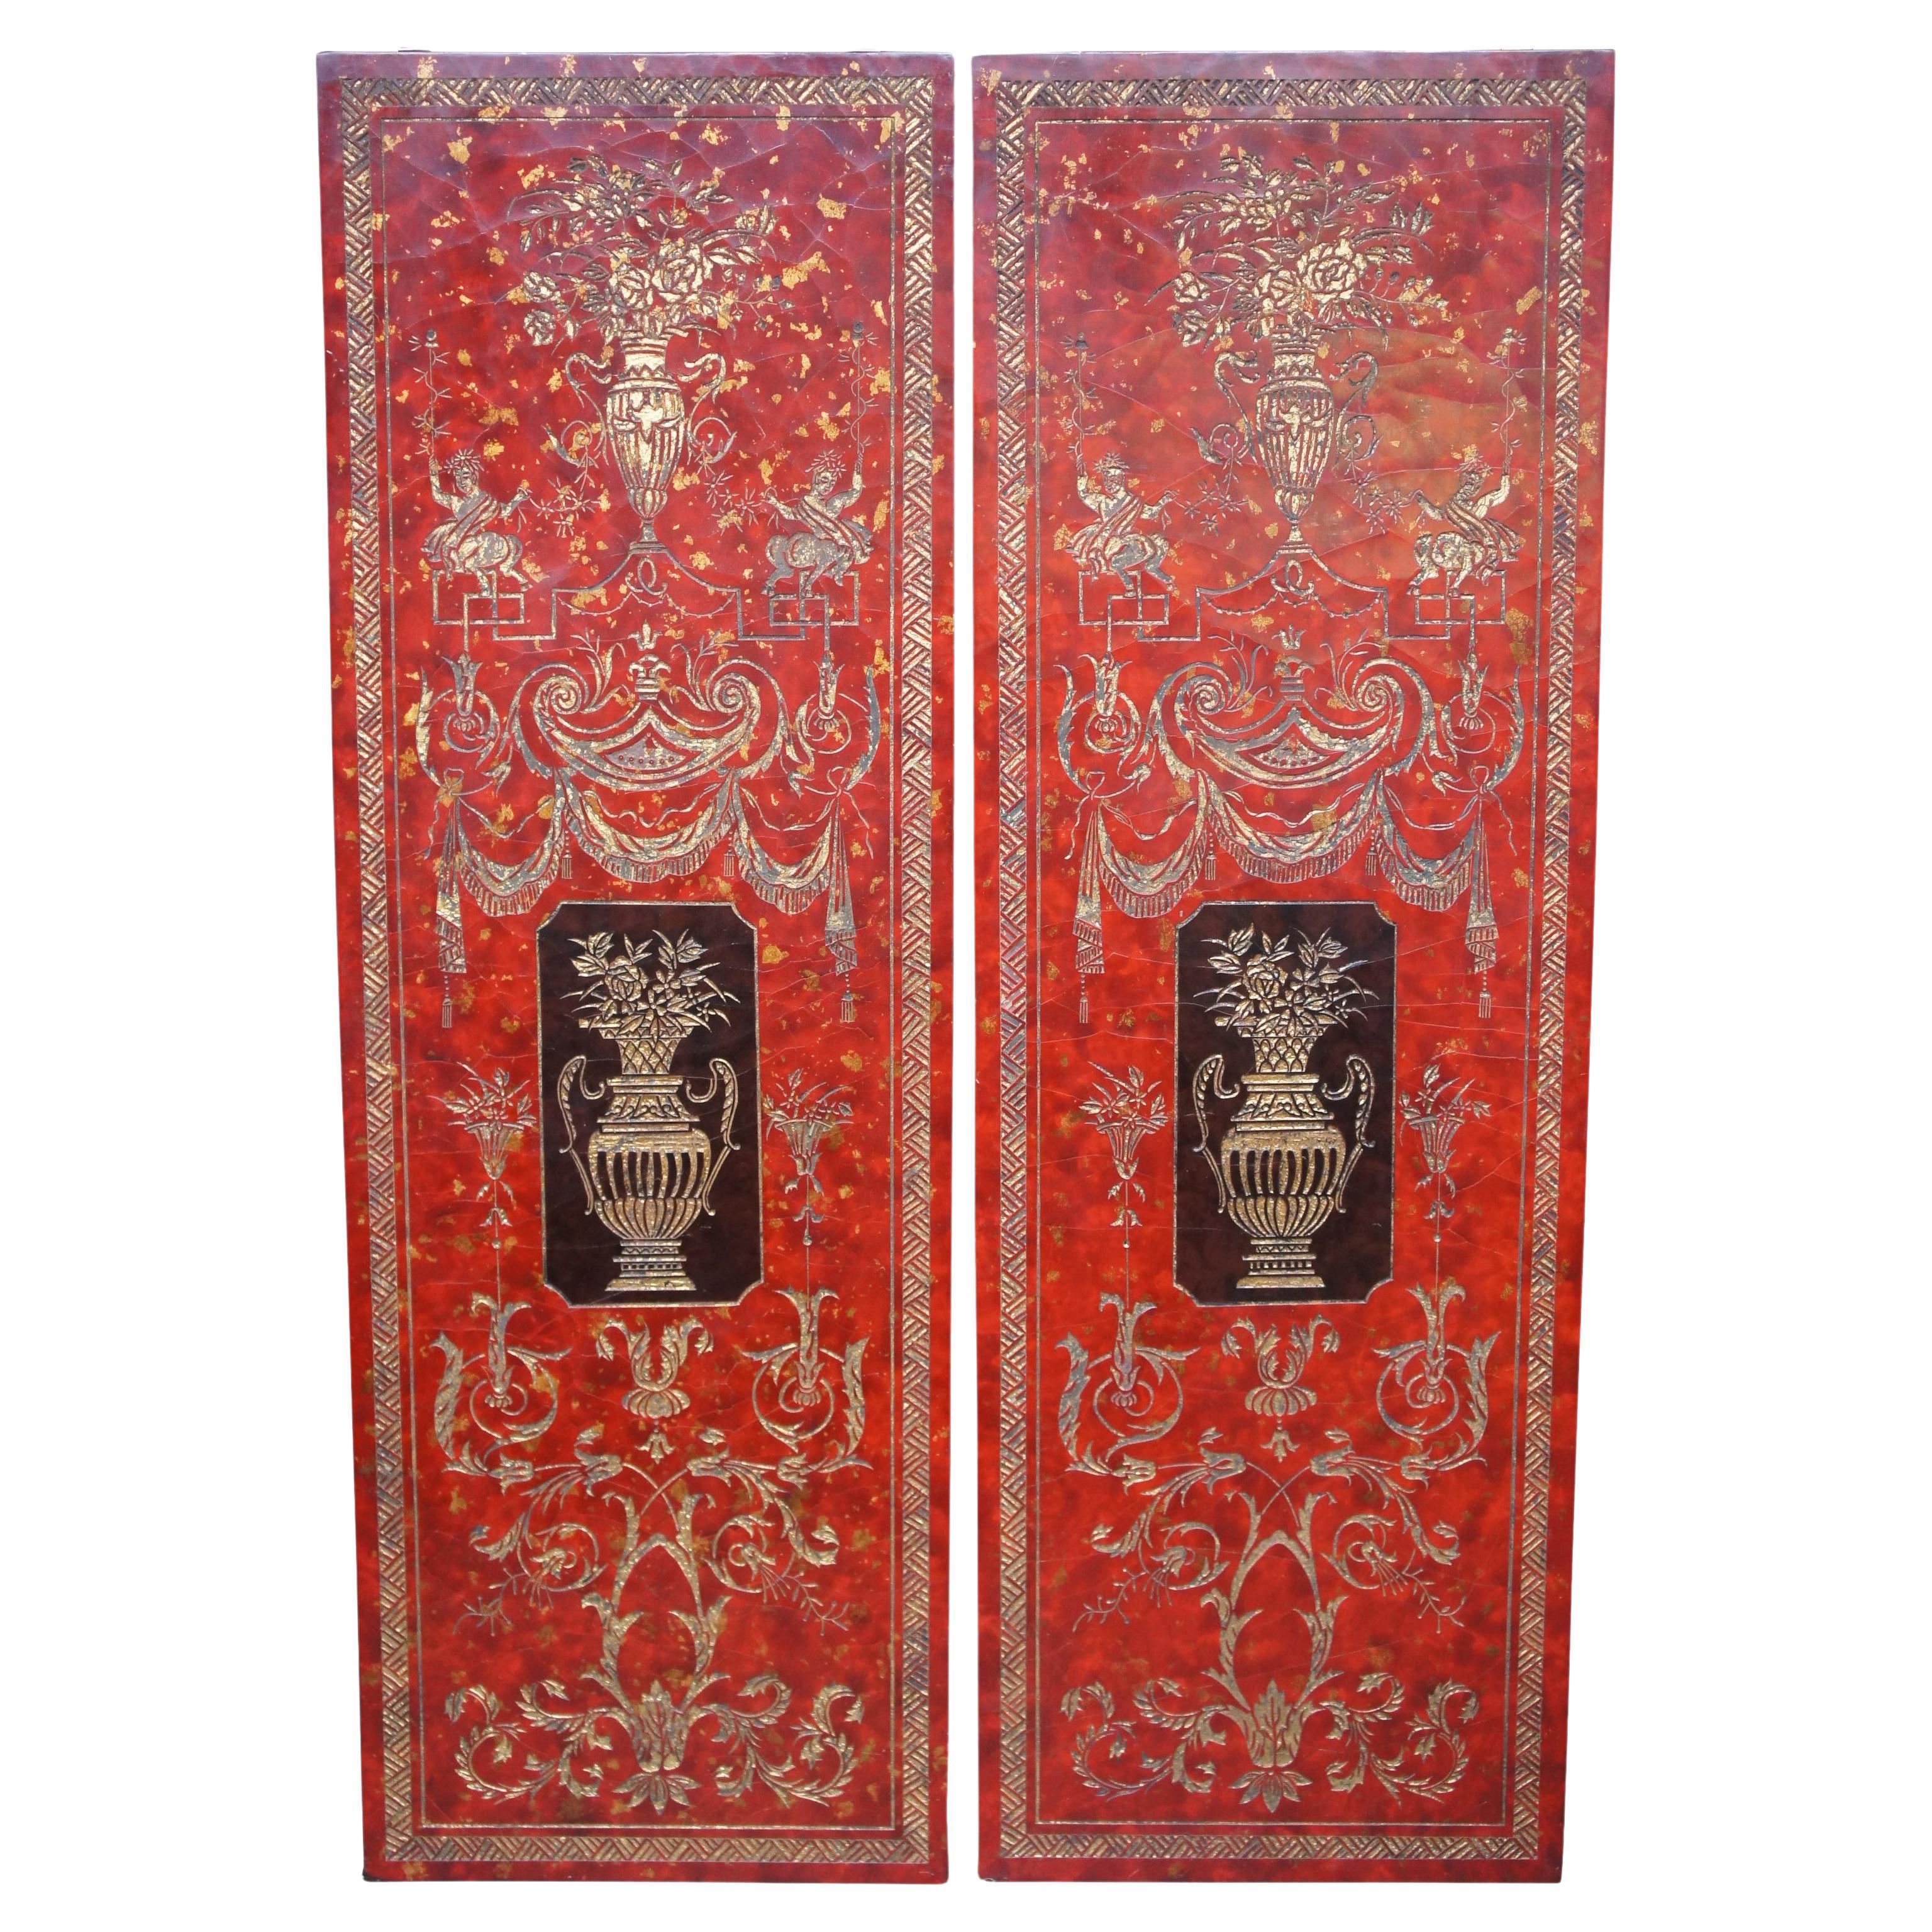 2 French Neoclassical Style Red Lacquer Wall Hanging Panels Gold Urns & Figures For Sale